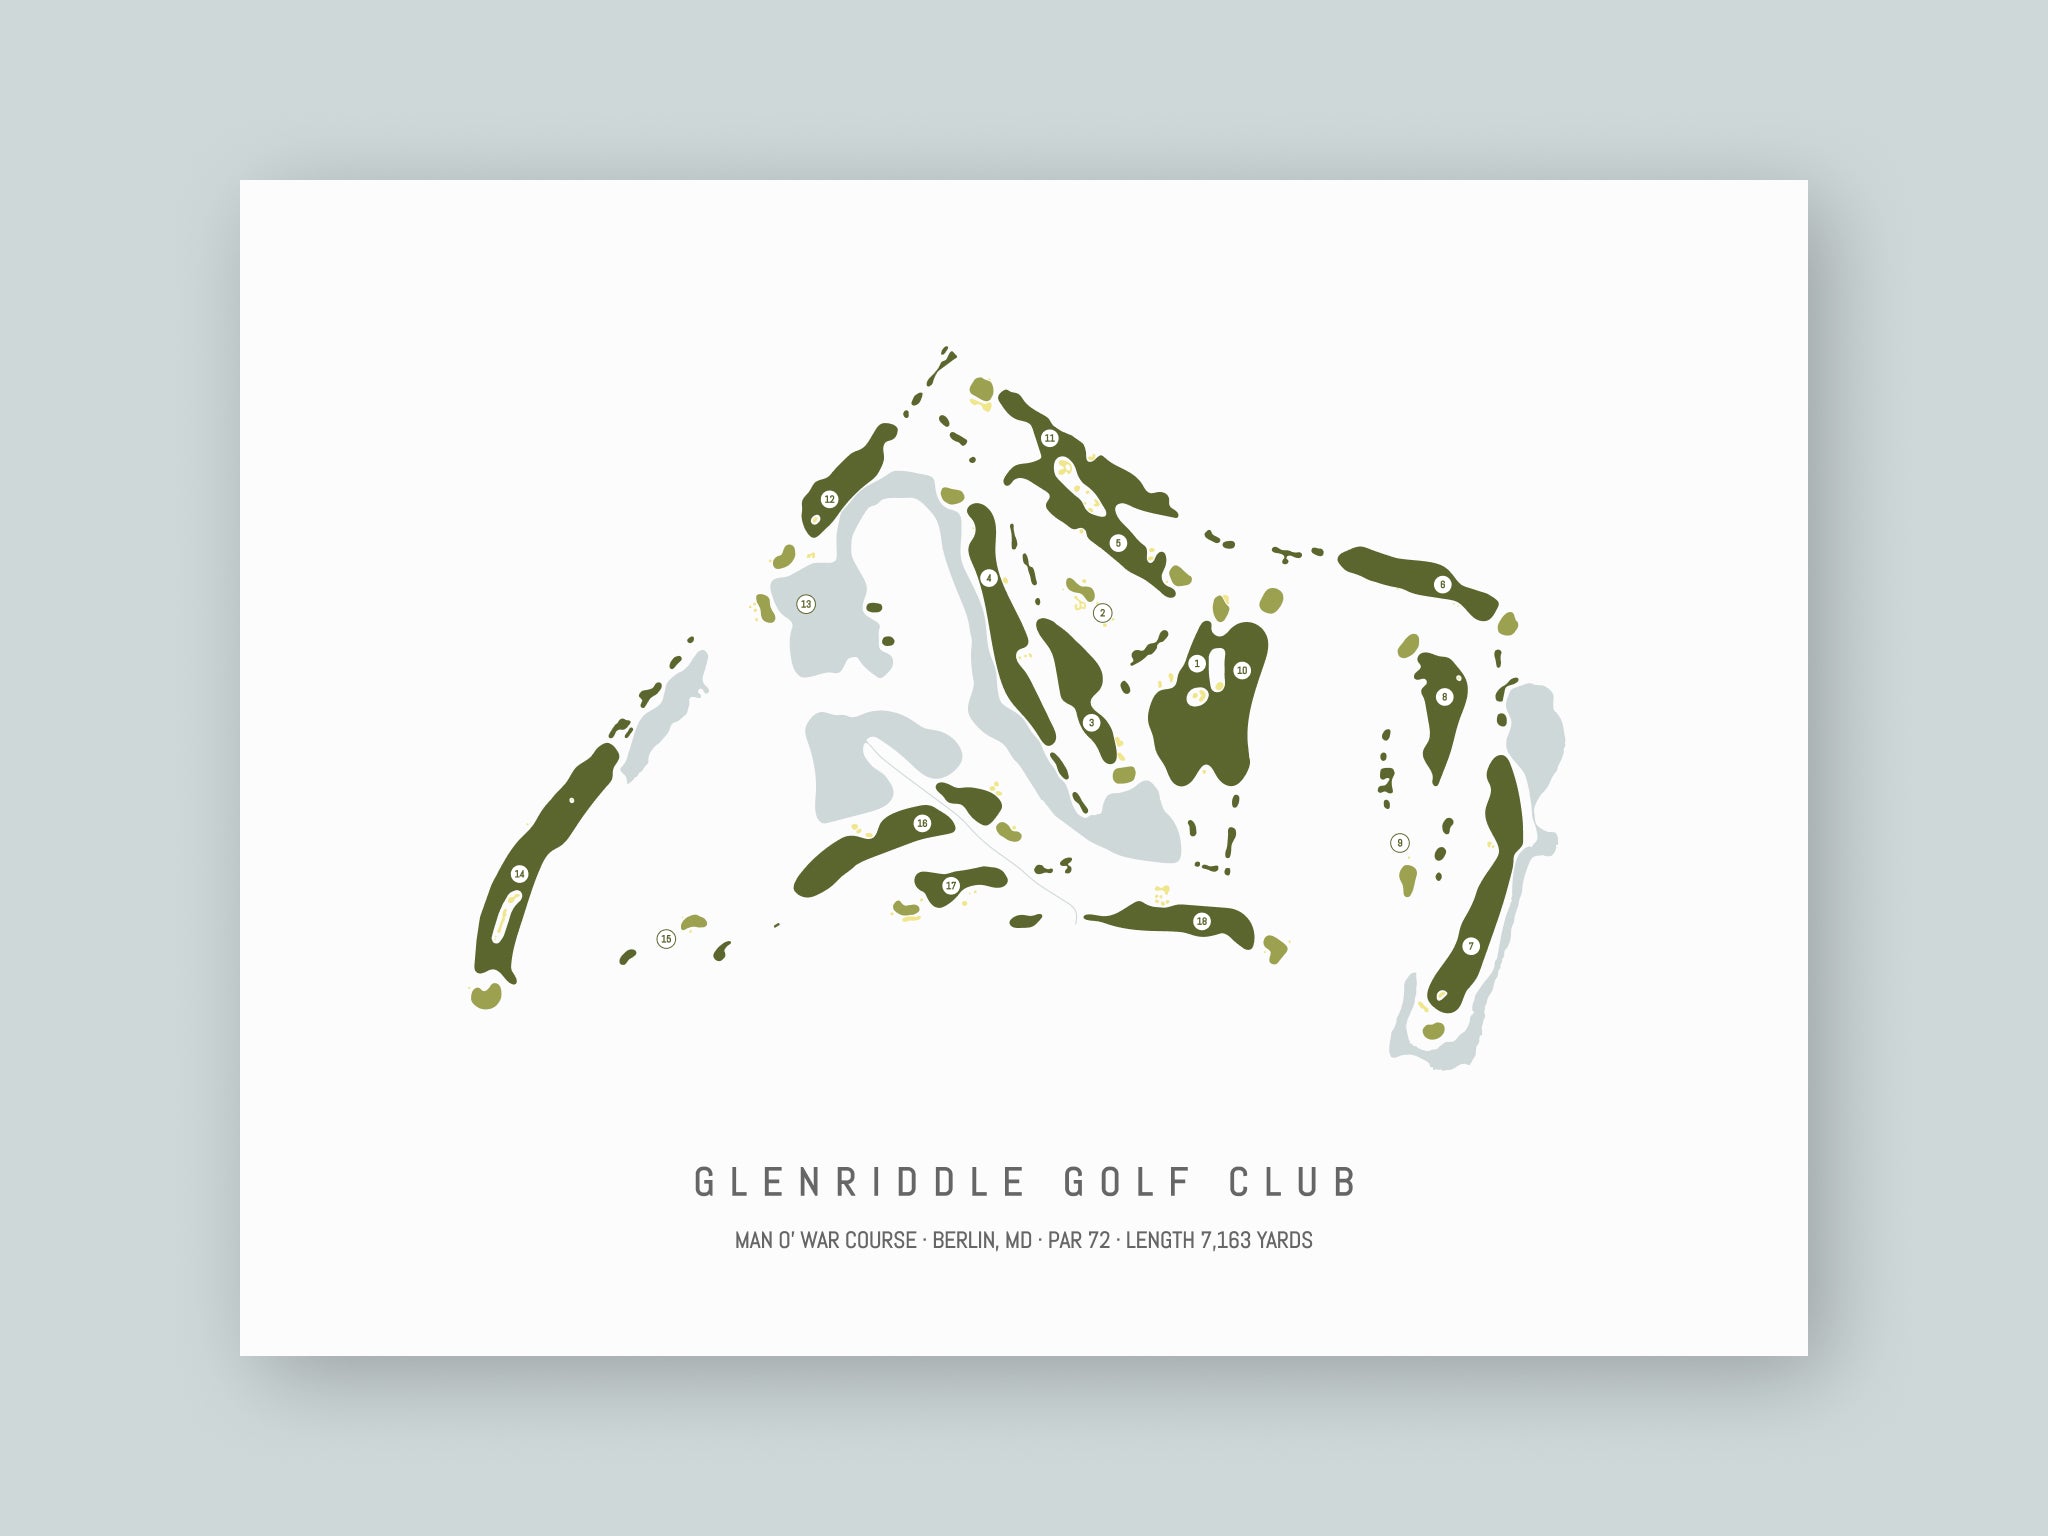 GlenRiddle-Golf-Club-Man-O-War-Course-MD--Unframed-24x18-With-Hole-Numbers